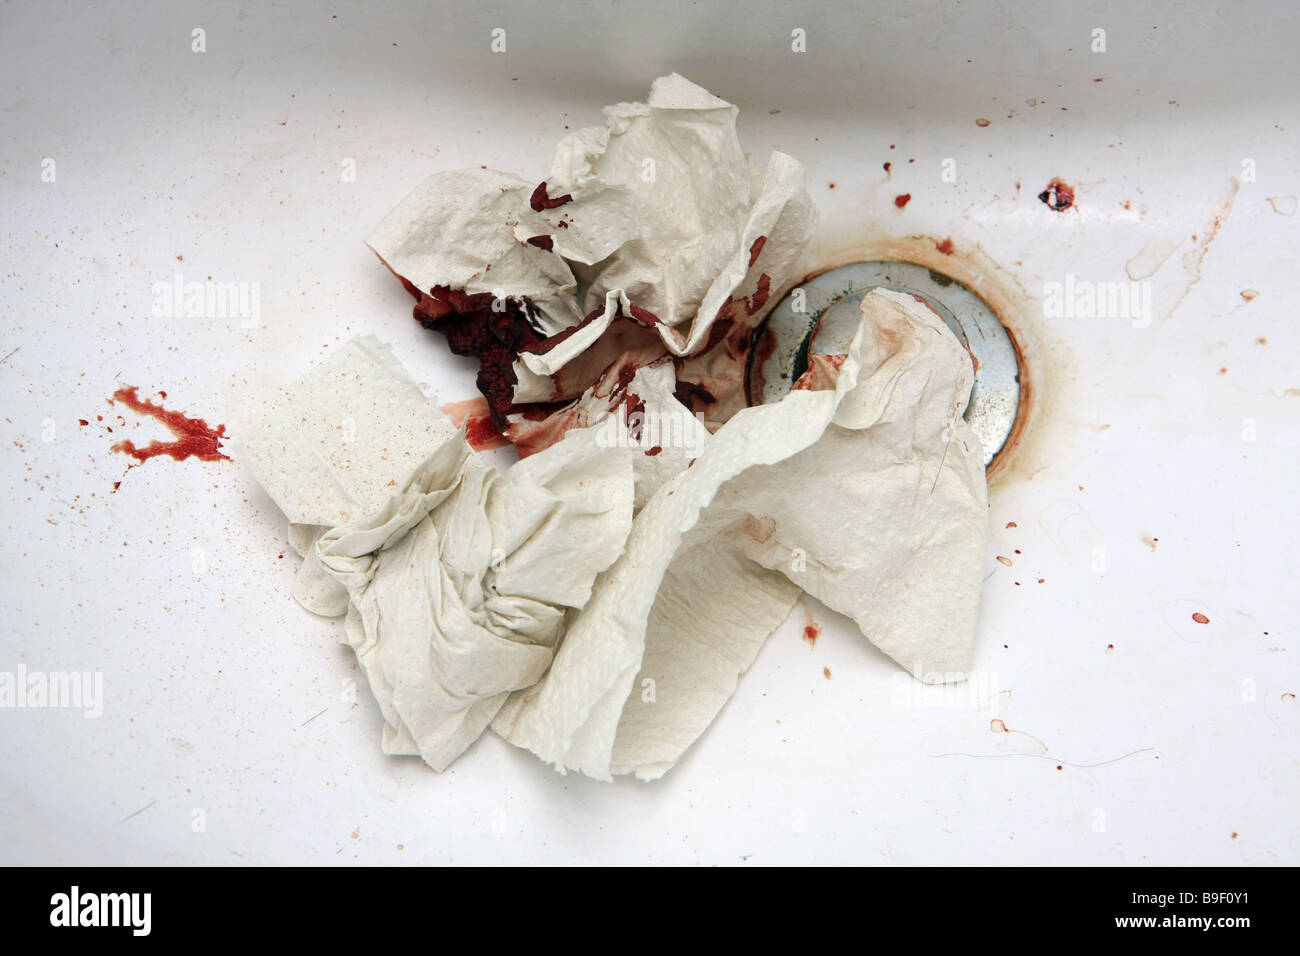 Bloody toilet paper, due to a bleeding nose, thrown in the sink. Stock Photo